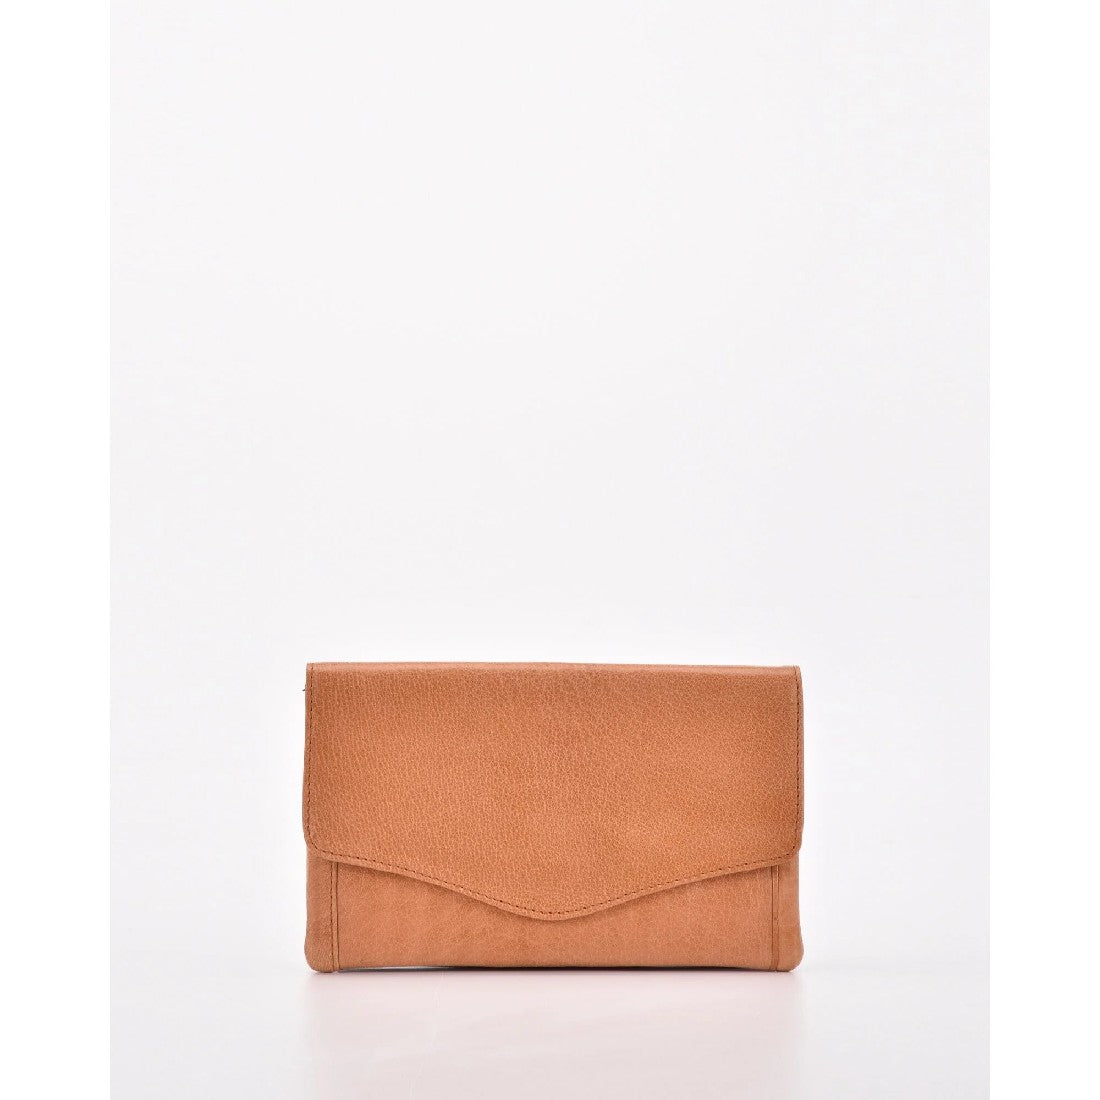 Cobb & Co Hume Leather Wallet